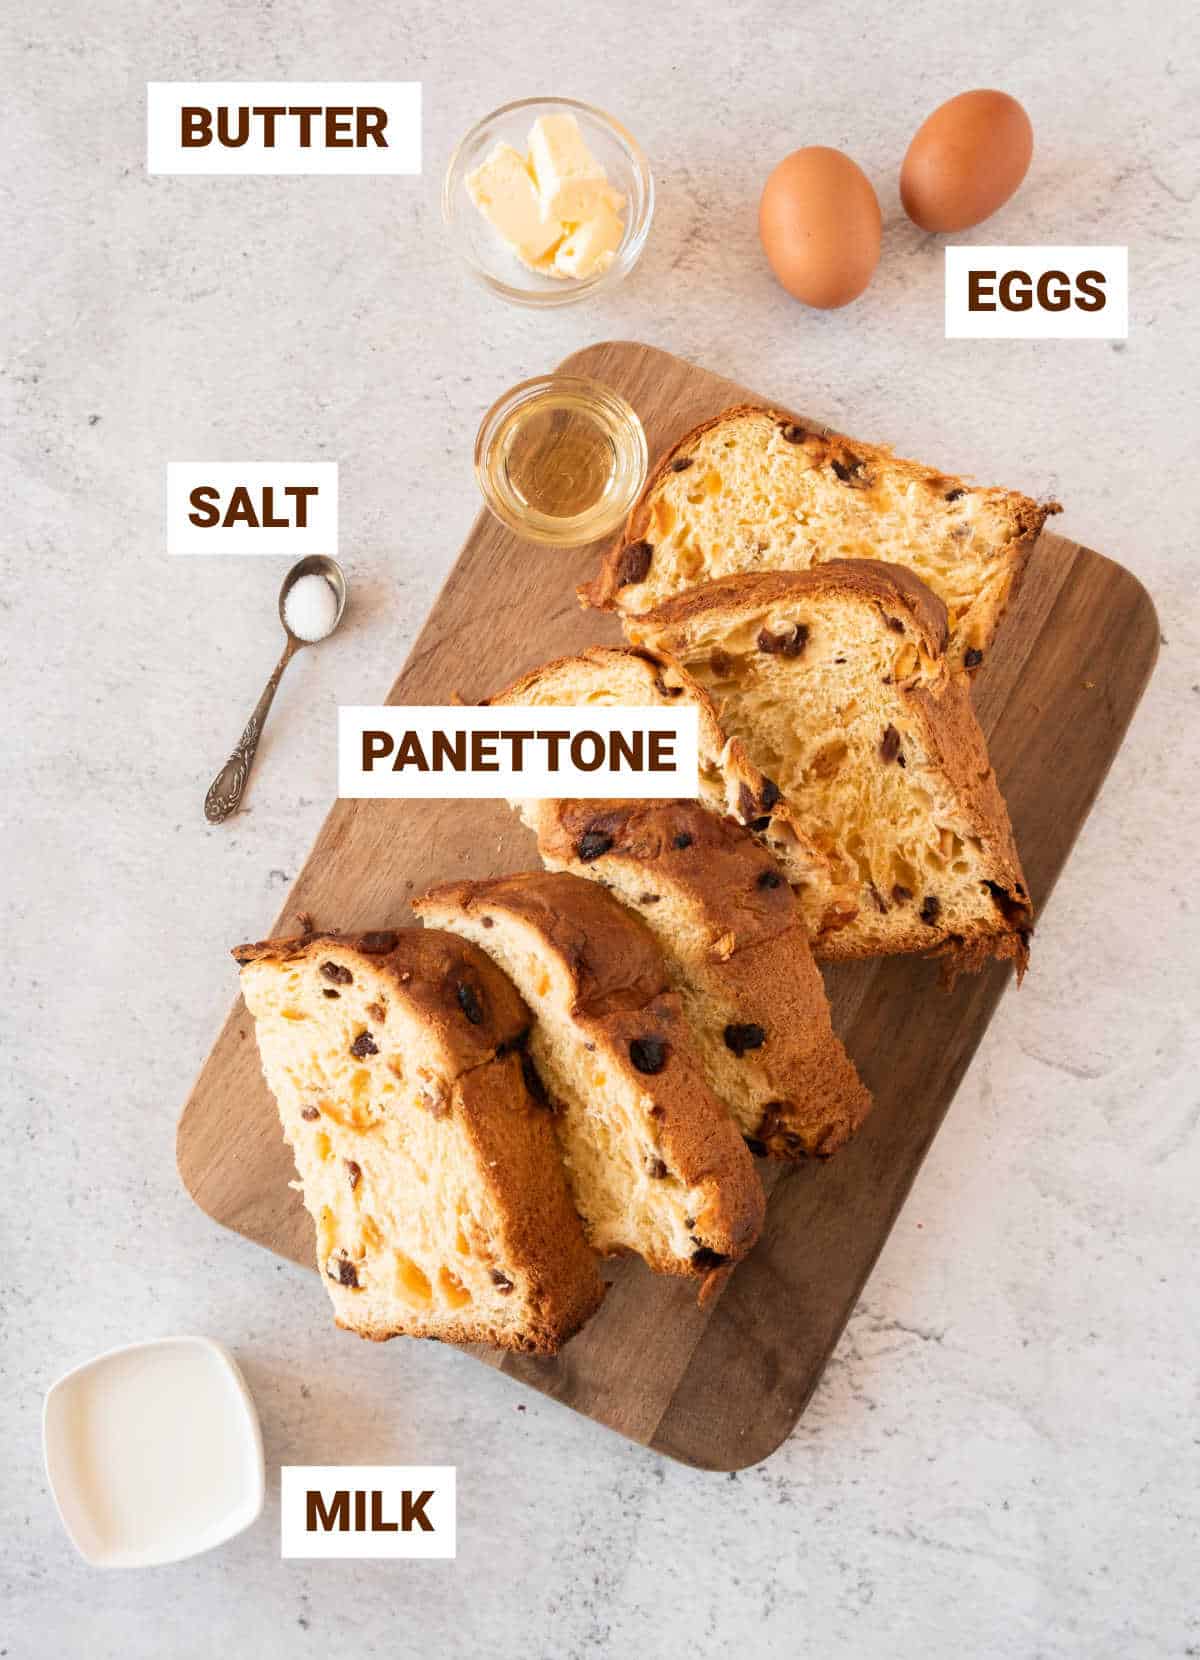 Wooden board on a gray surface with slices of panettone, eggs, butter, milk and salt.